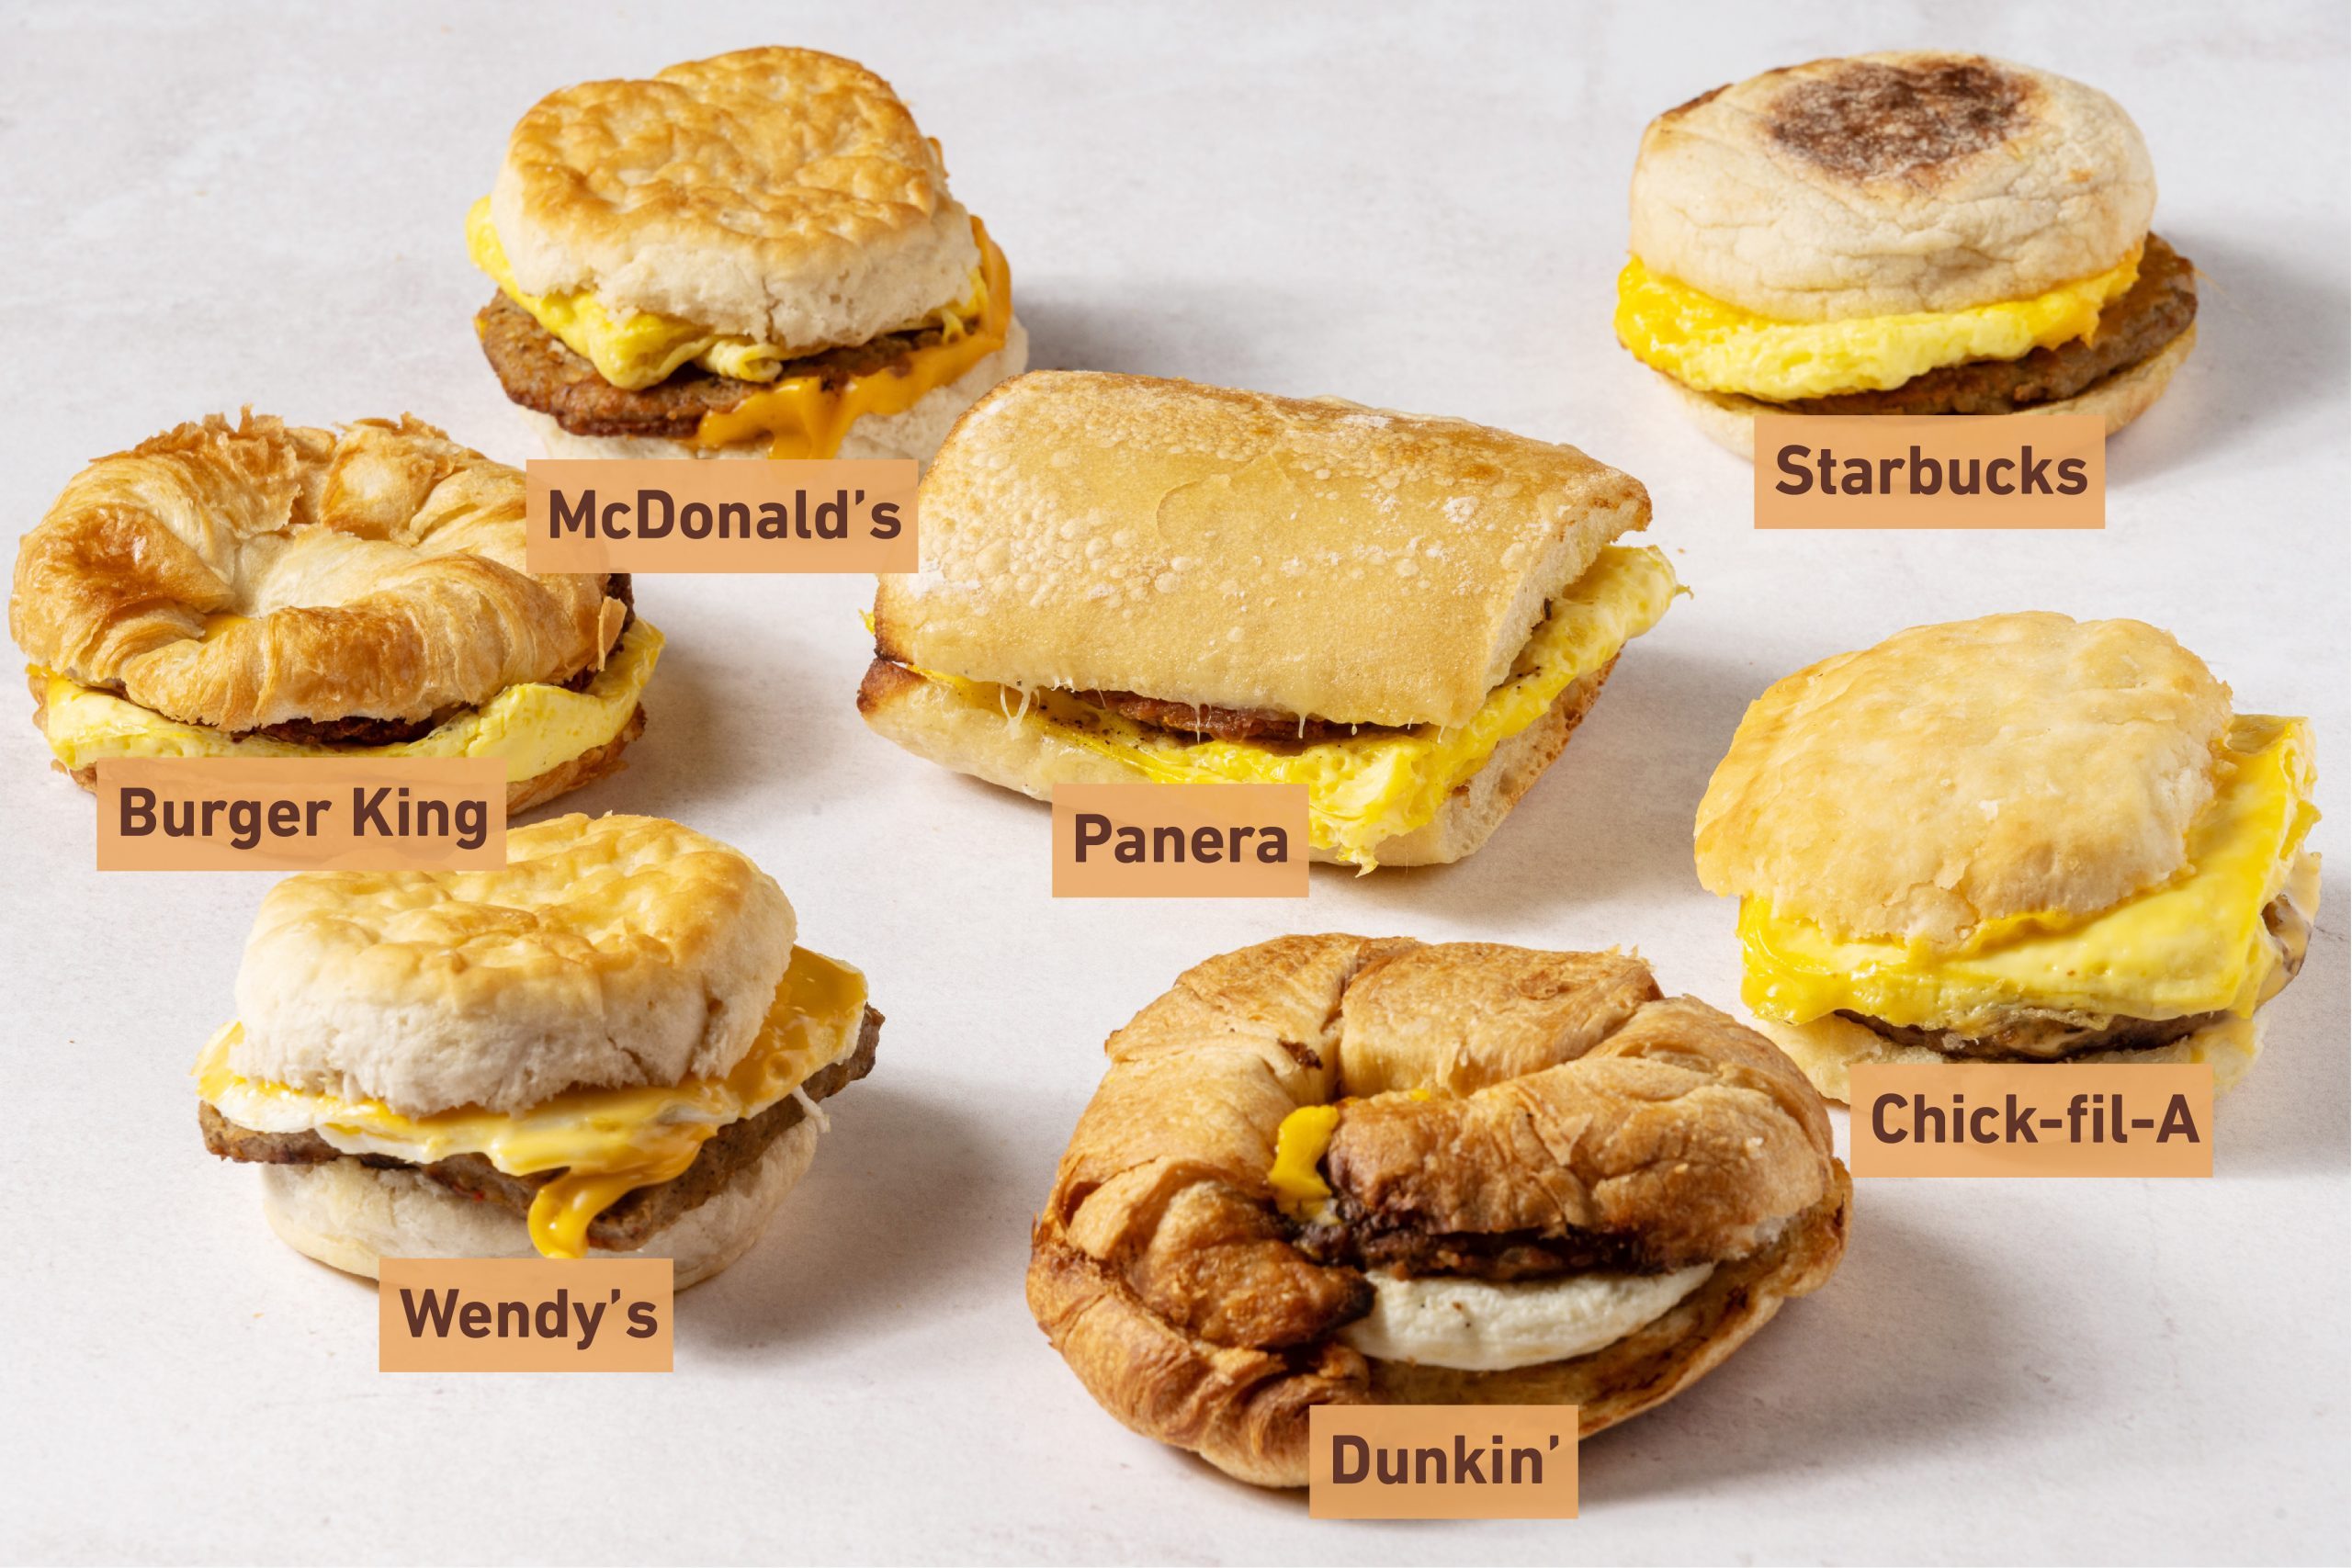 https://www.tasteofhome.com/wp-content/uploads/2022/04/7-fast-food-breakfest-sandwhiches-labeled-3.2-01-scaled.jpg?fit=700%2C467